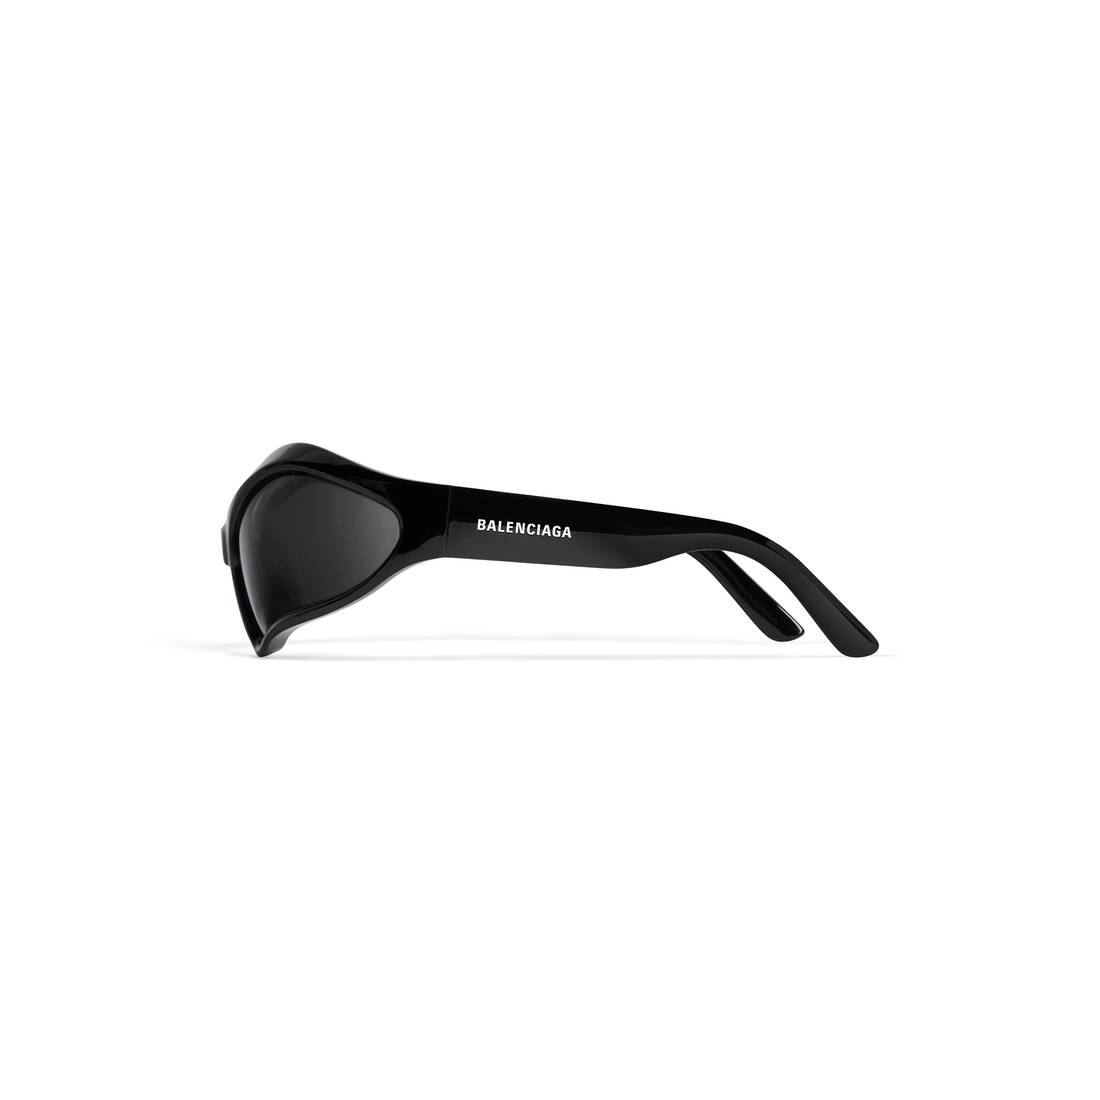 Fennec Oval Sunglasses in Black